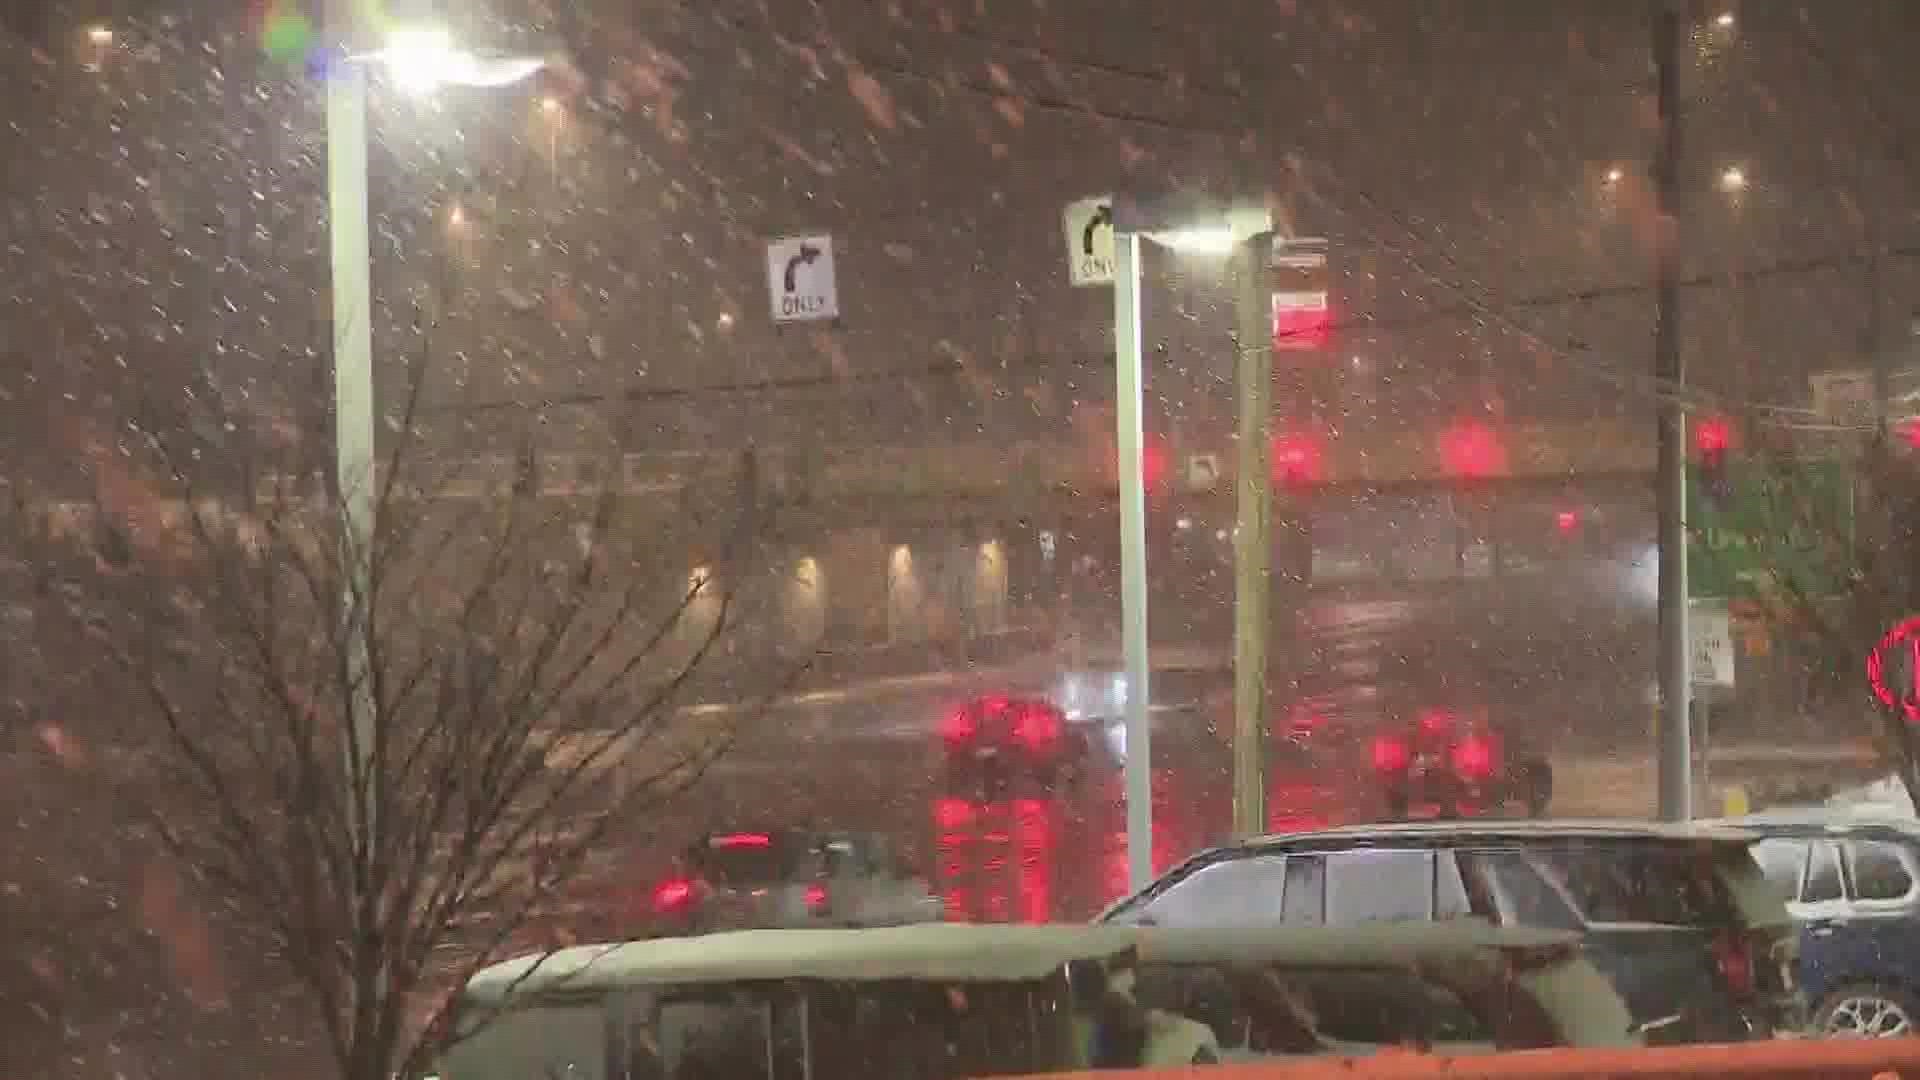 Here's our team coverage from across Northeast Ohio with weather and traffic updates amid a Winter Weather Advisory.